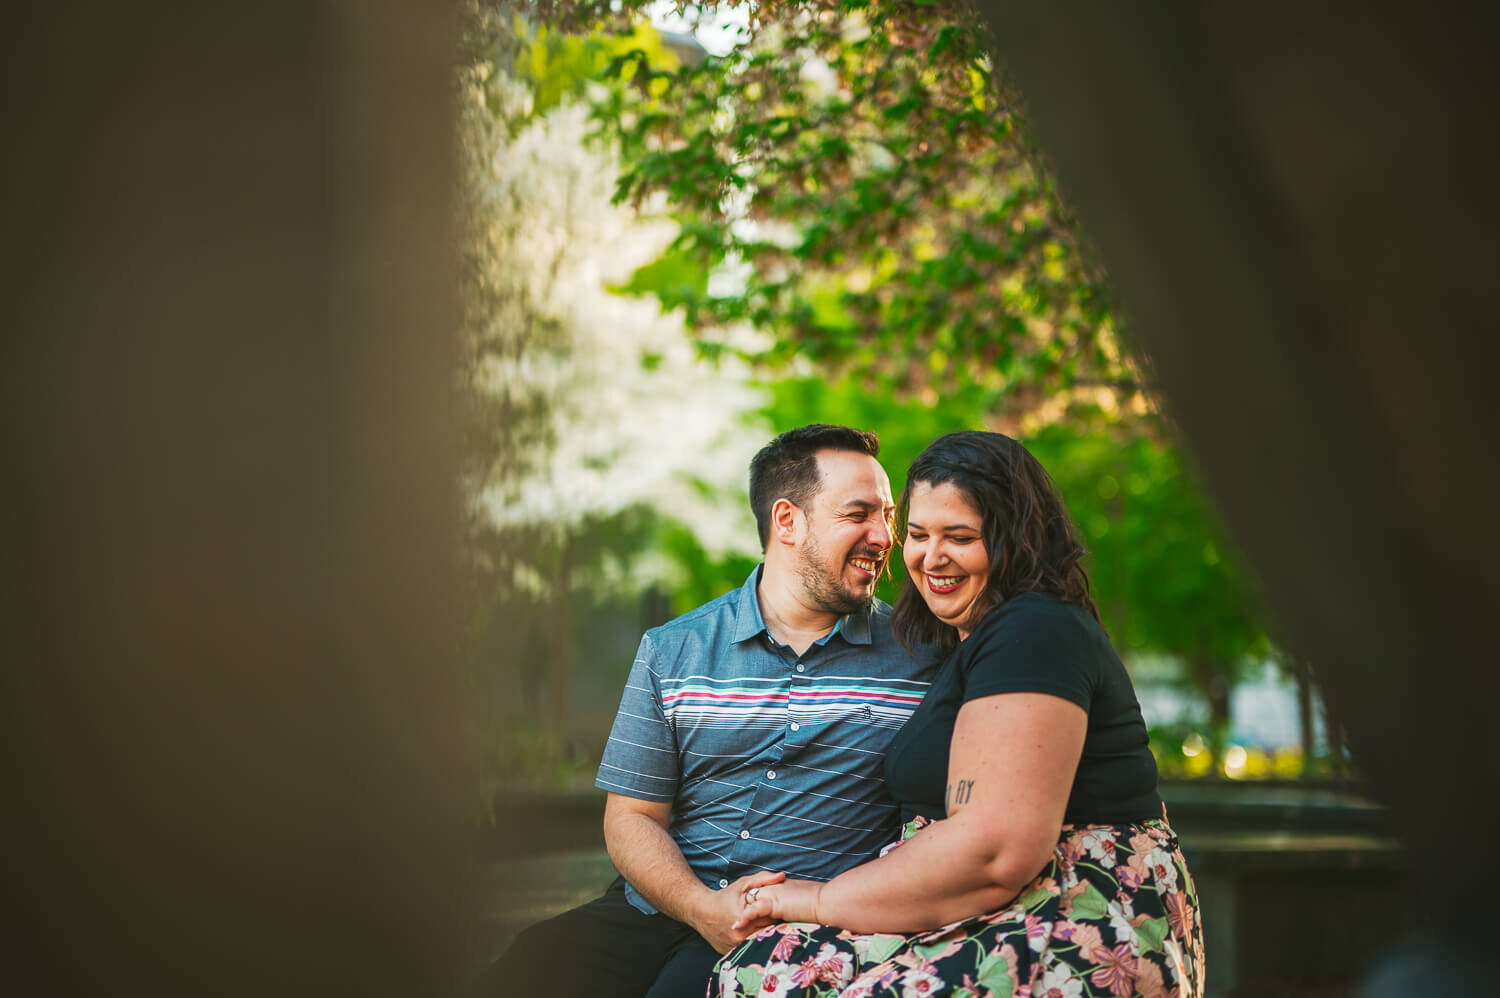 st louis city garden engagement session becky and michael-2.jpg